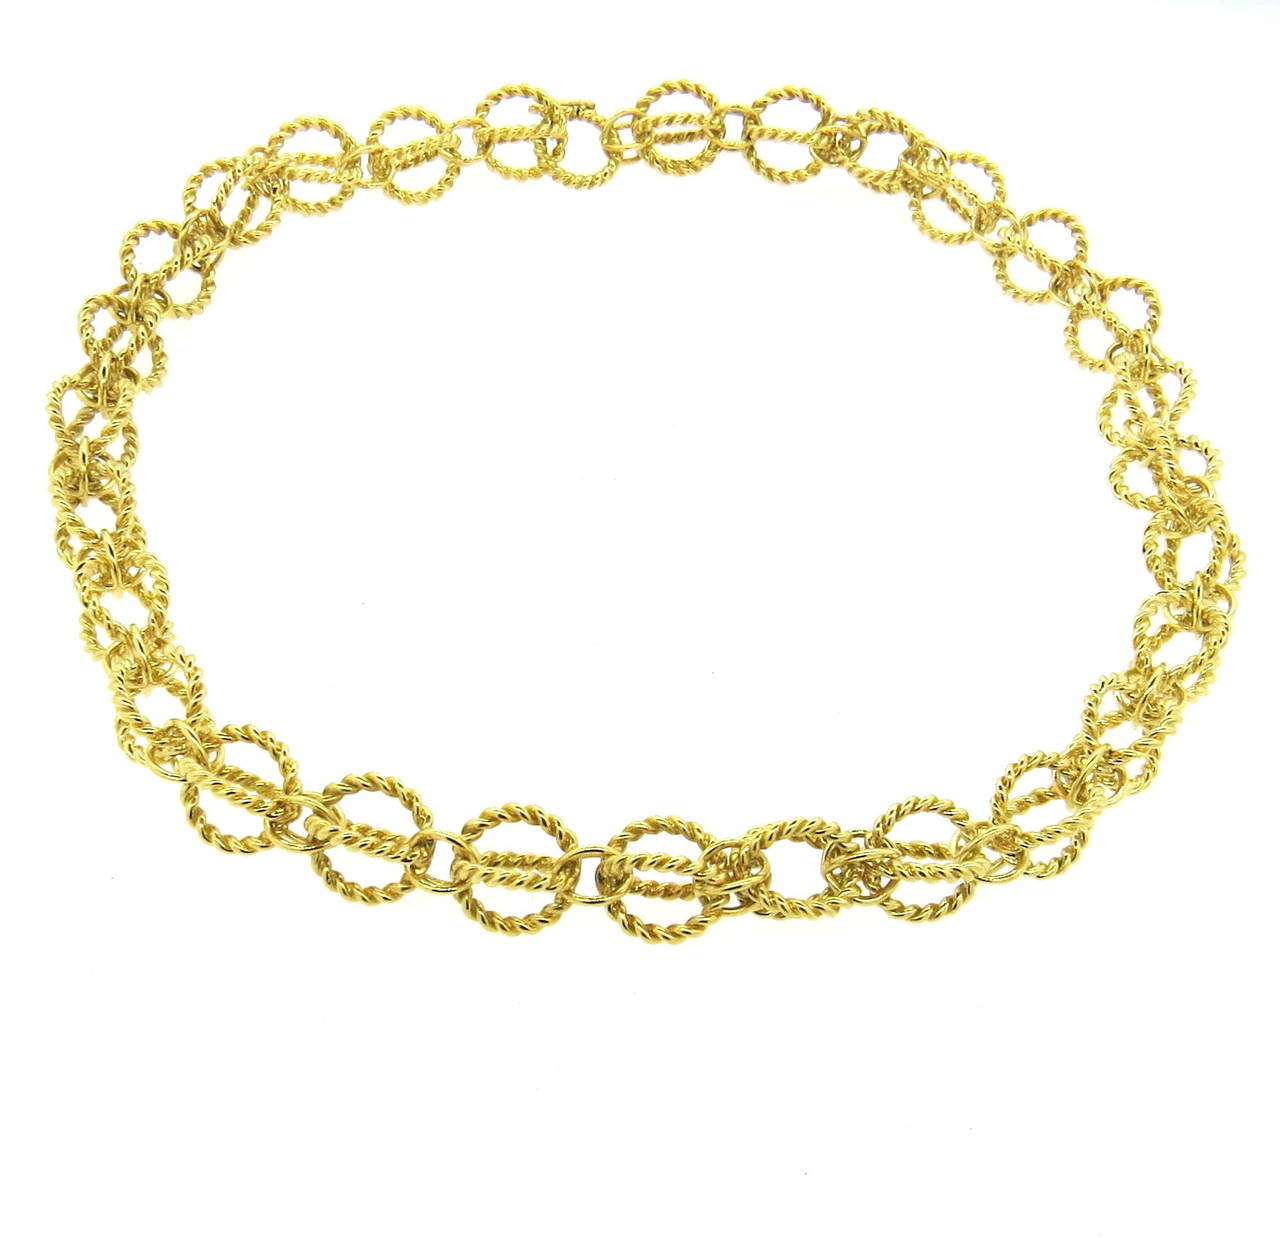 An 18k yellow gold necklace of twisted gold wires to form a rope design.  Crafted by Jean Schlumberger Studios for Tiffany & Co, the necklace is 18